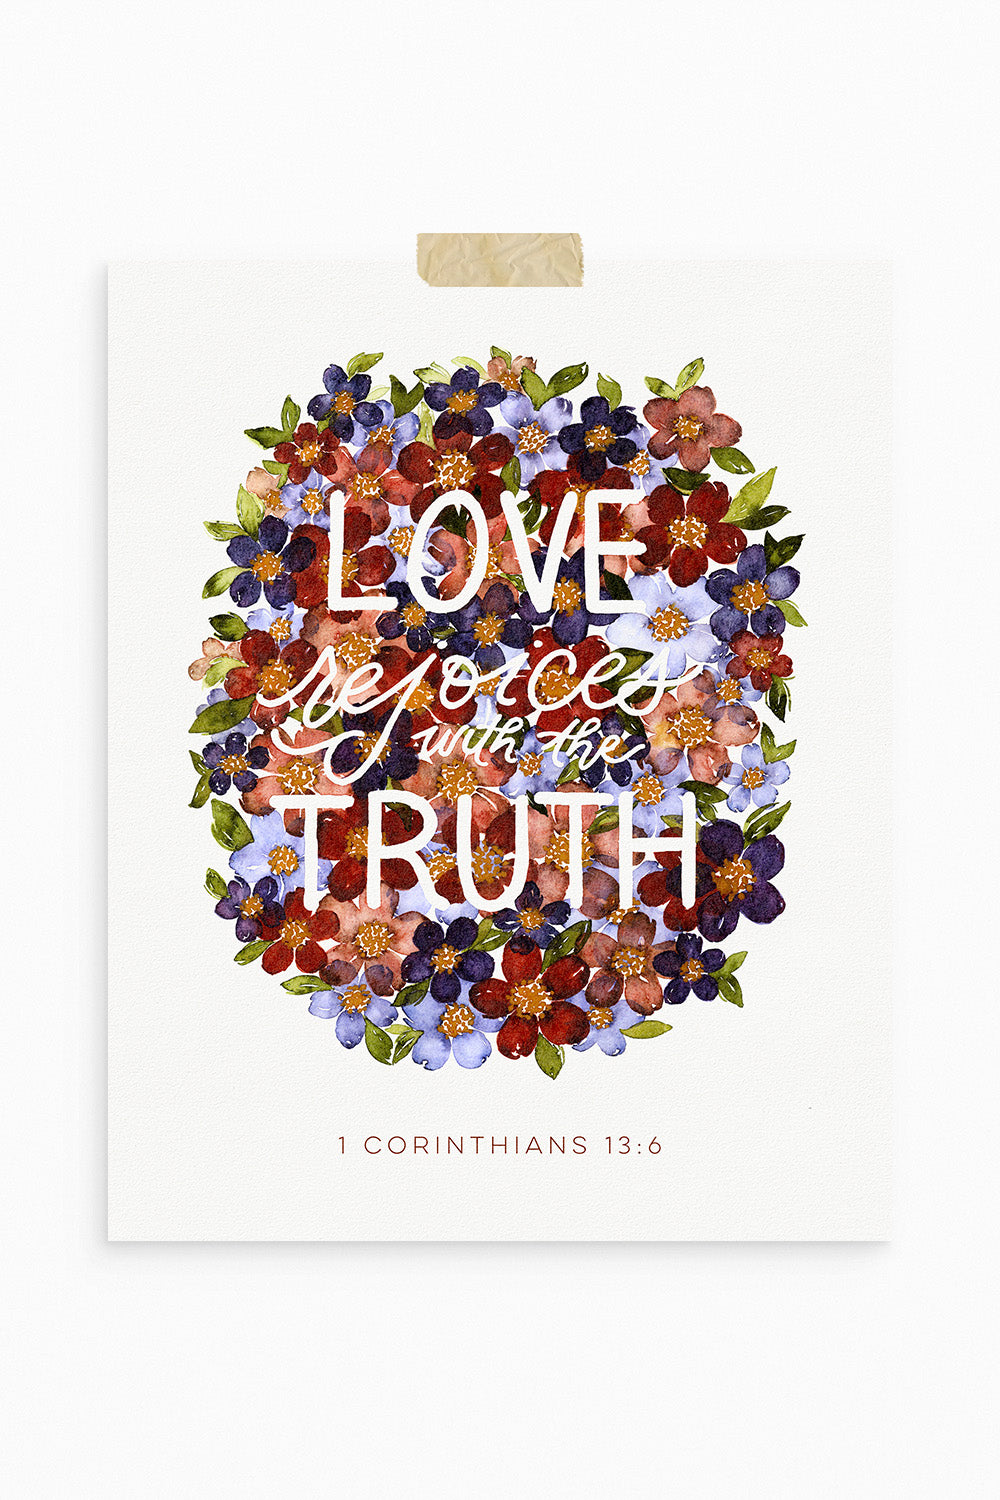 “Love Rejoices with the Truth”